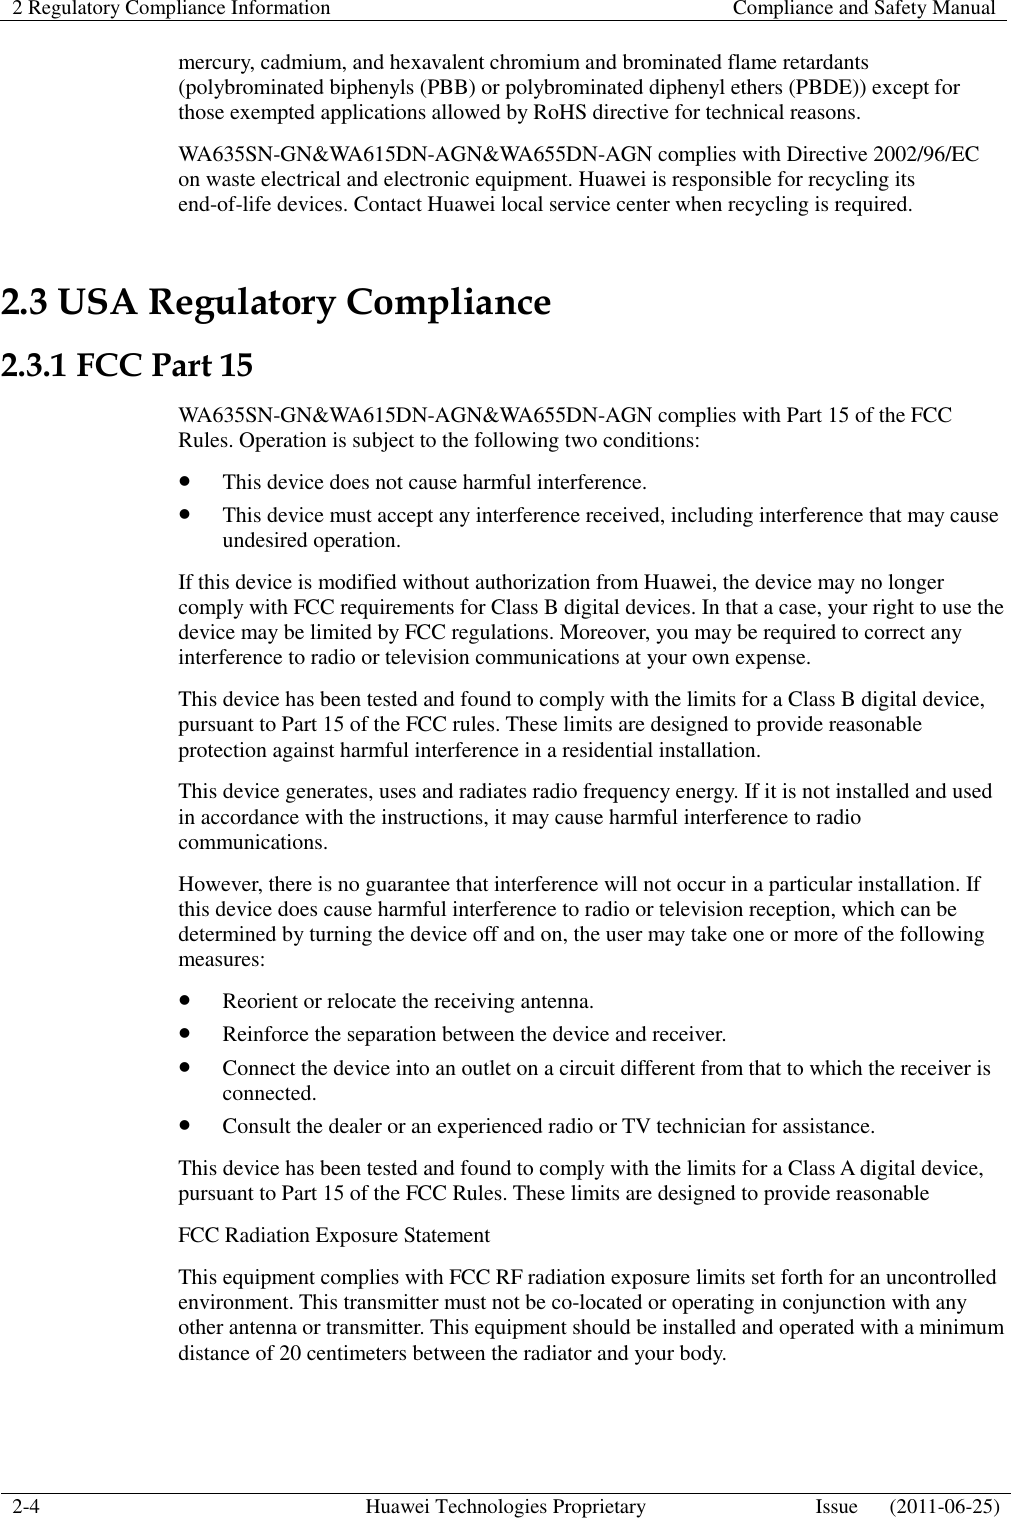 2 Regulatory Compliance Information    Compliance and Safety Manual  2-4 Huawei Technologies Proprietary Issue      (2011-06-25)  mercury, cadmium, and hexavalent chromium and brominated flame retardants (polybrominated biphenyls (PBB) or polybrominated diphenyl ethers (PBDE)) except for those exempted applications allowed by RoHS directive for technical reasons. WA635SN-GN&amp;WA615DN-AGN&amp;WA655DN-AGN complies with Directive 2002/96/EC on waste electrical and electronic equipment. Huawei is responsible for recycling its end-of-life devices. Contact Huawei local service center when recycling is required. 2.3 USA Regulatory Compliance 2.3.1 FCC Part 15 WA635SN-GN&amp;WA615DN-AGN&amp;WA655DN-AGN complies with Part 15 of the FCC Rules. Operation is subject to the following two conditions:  This device does not cause harmful interference.  This device must accept any interference received, including interference that may cause undesired operation. If this device is modified without authorization from Huawei, the device may no longer comply with FCC requirements for Class B digital devices. In that a case, your right to use the device may be limited by FCC regulations. Moreover, you may be required to correct any interference to radio or television communications at your own expense. This device has been tested and found to comply with the limits for a Class B digital device, pursuant to Part 15 of the FCC rules. These limits are designed to provide reasonable protection against harmful interference in a residential installation. This device generates, uses and radiates radio frequency energy. If it is not installed and used in accordance with the instructions, it may cause harmful interference to radio communications. However, there is no guarantee that interference will not occur in a particular installation. If this device does cause harmful interference to radio or television reception, which can be determined by turning the device off and on, the user may take one or more of the following measures:  Reorient or relocate the receiving antenna.  Reinforce the separation between the device and receiver.  Connect the device into an outlet on a circuit different from that to which the receiver is connected.  Consult the dealer or an experienced radio or TV technician for assistance. This device has been tested and found to comply with the limits for a Class A digital device, pursuant to Part 15 of the FCC Rules. These limits are designed to provide reasonable   FCC Radiation Exposure Statement   This equipment complies with FCC RF radiation exposure limits set forth for an uncontrolled environment. This transmitter must not be co-located or operating in conjunction with any other antenna or transmitter. This equipment should be installed and operated with a minimum distance of 20 centimeters between the radiator and your body.   